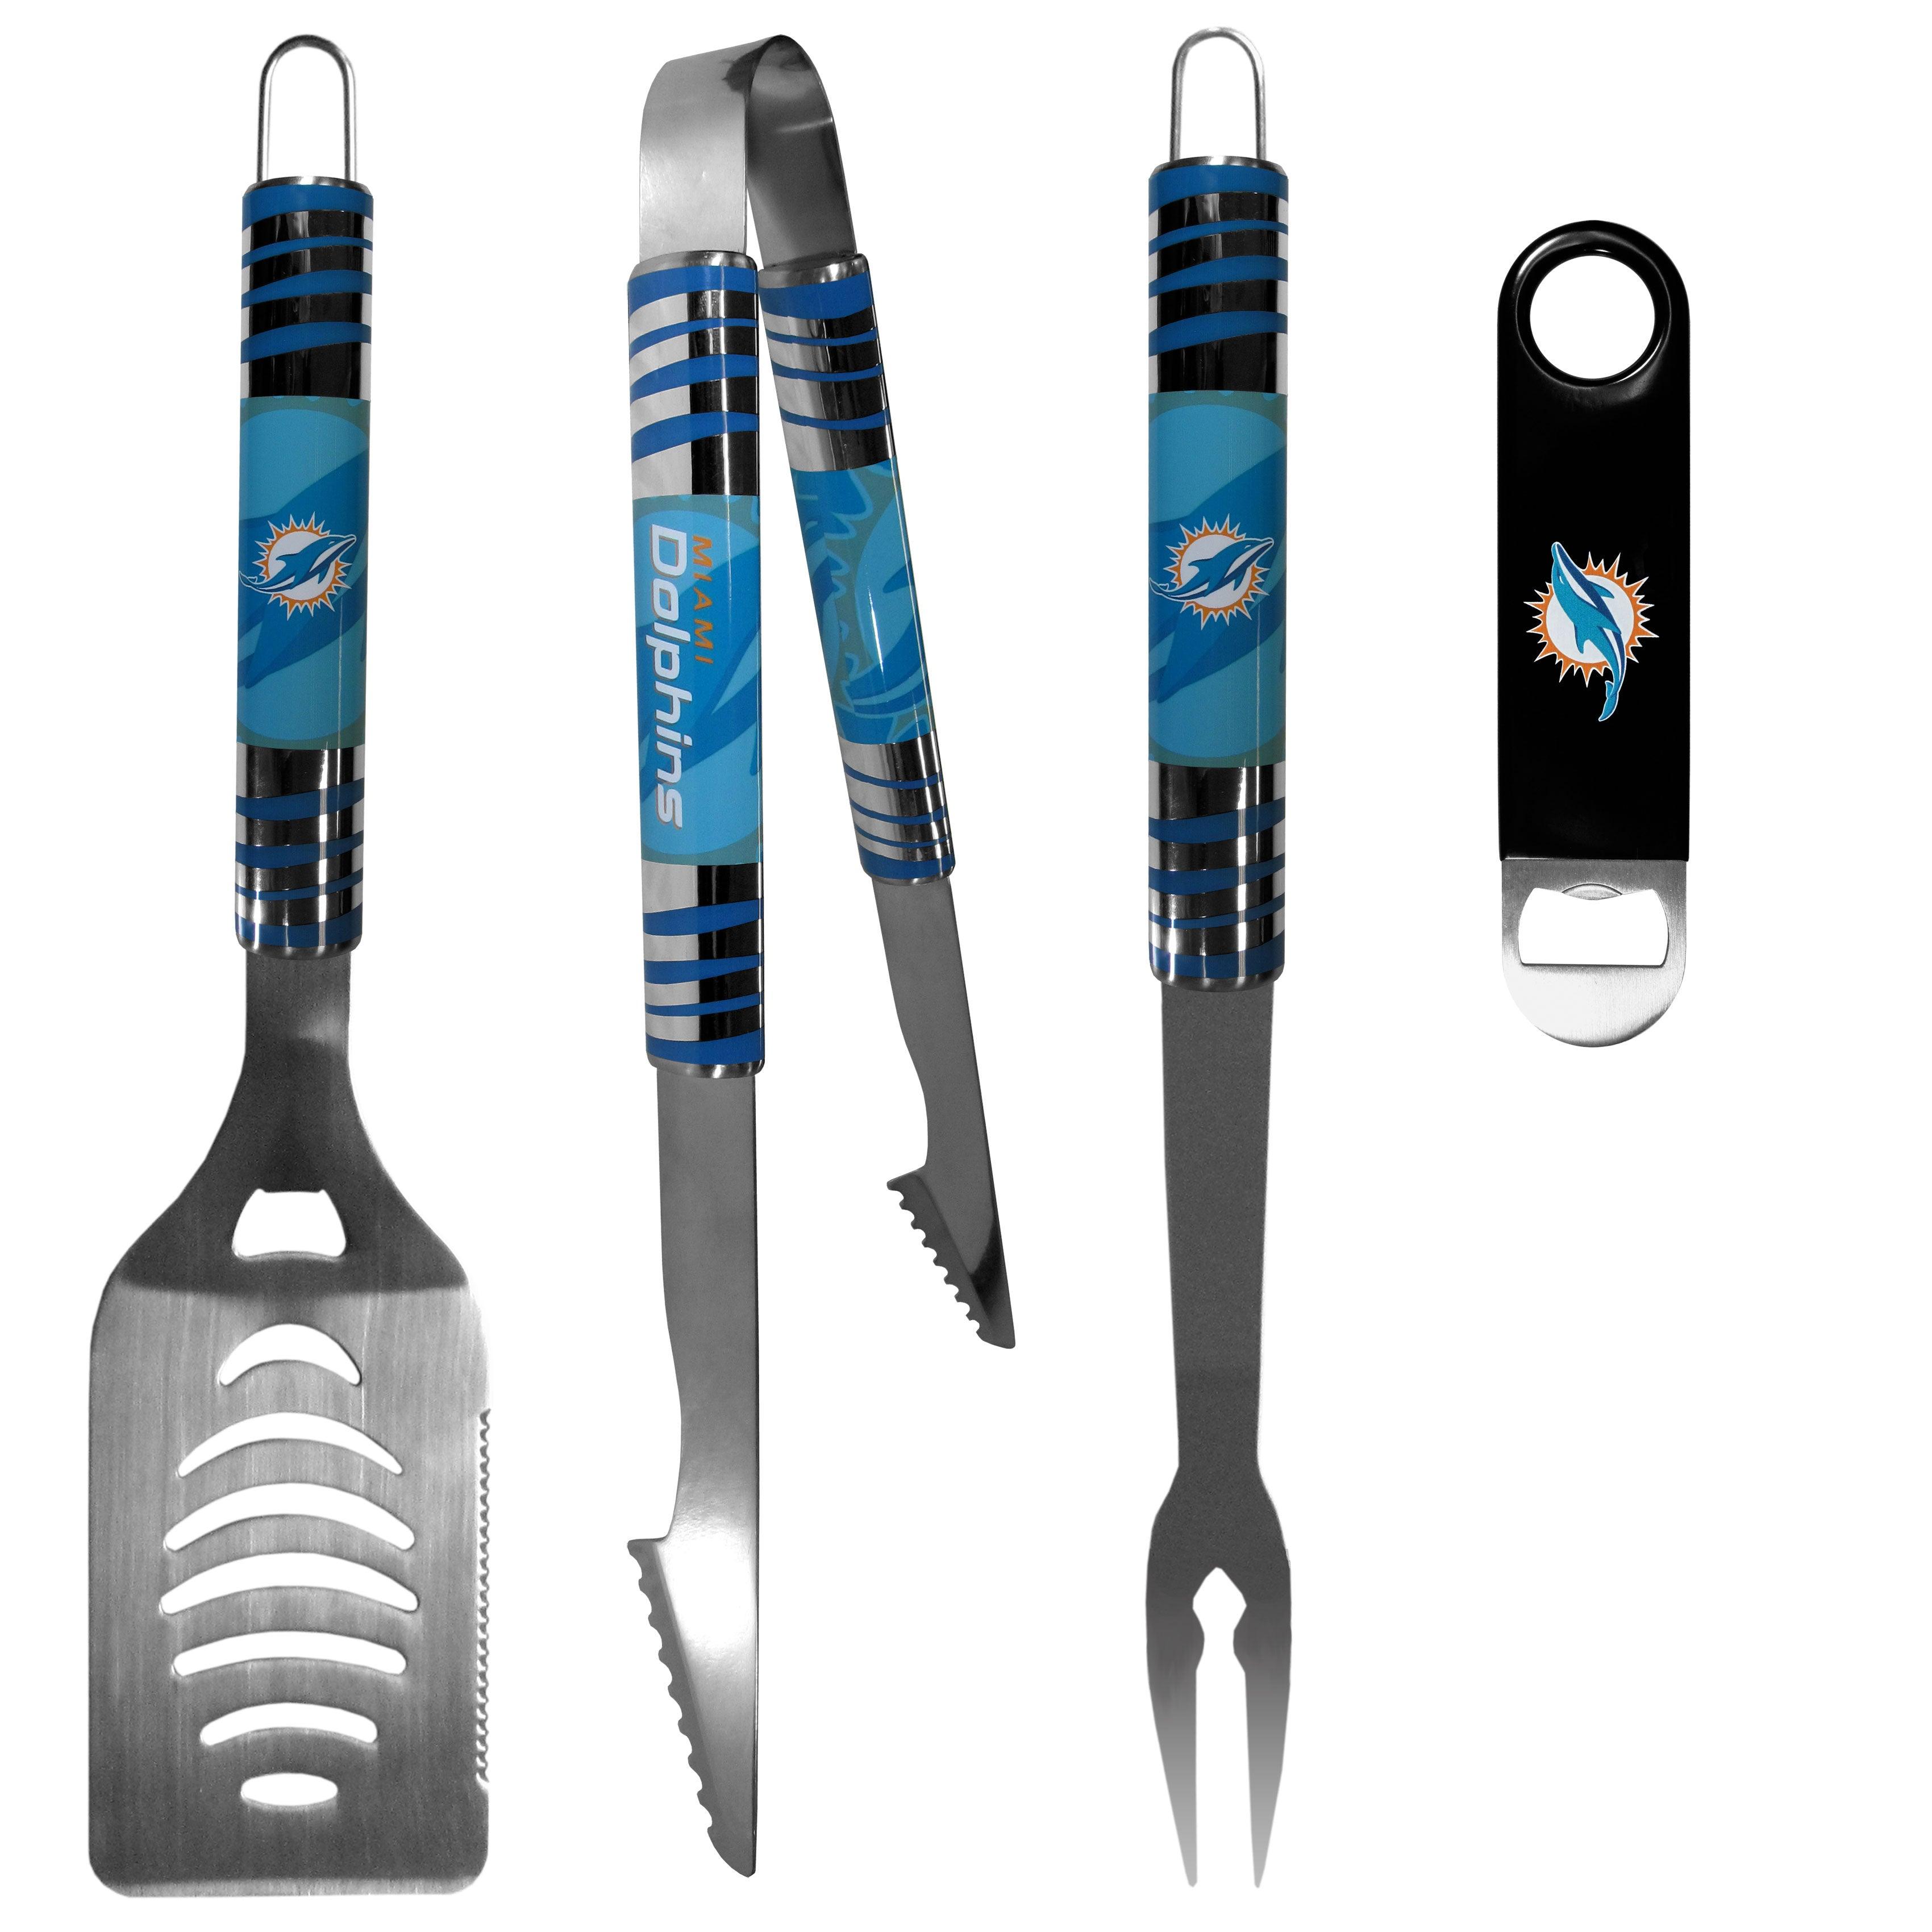 Miami Dolphins 3 pc BBQ Set and Bottle Opener - Flyclothing LLC